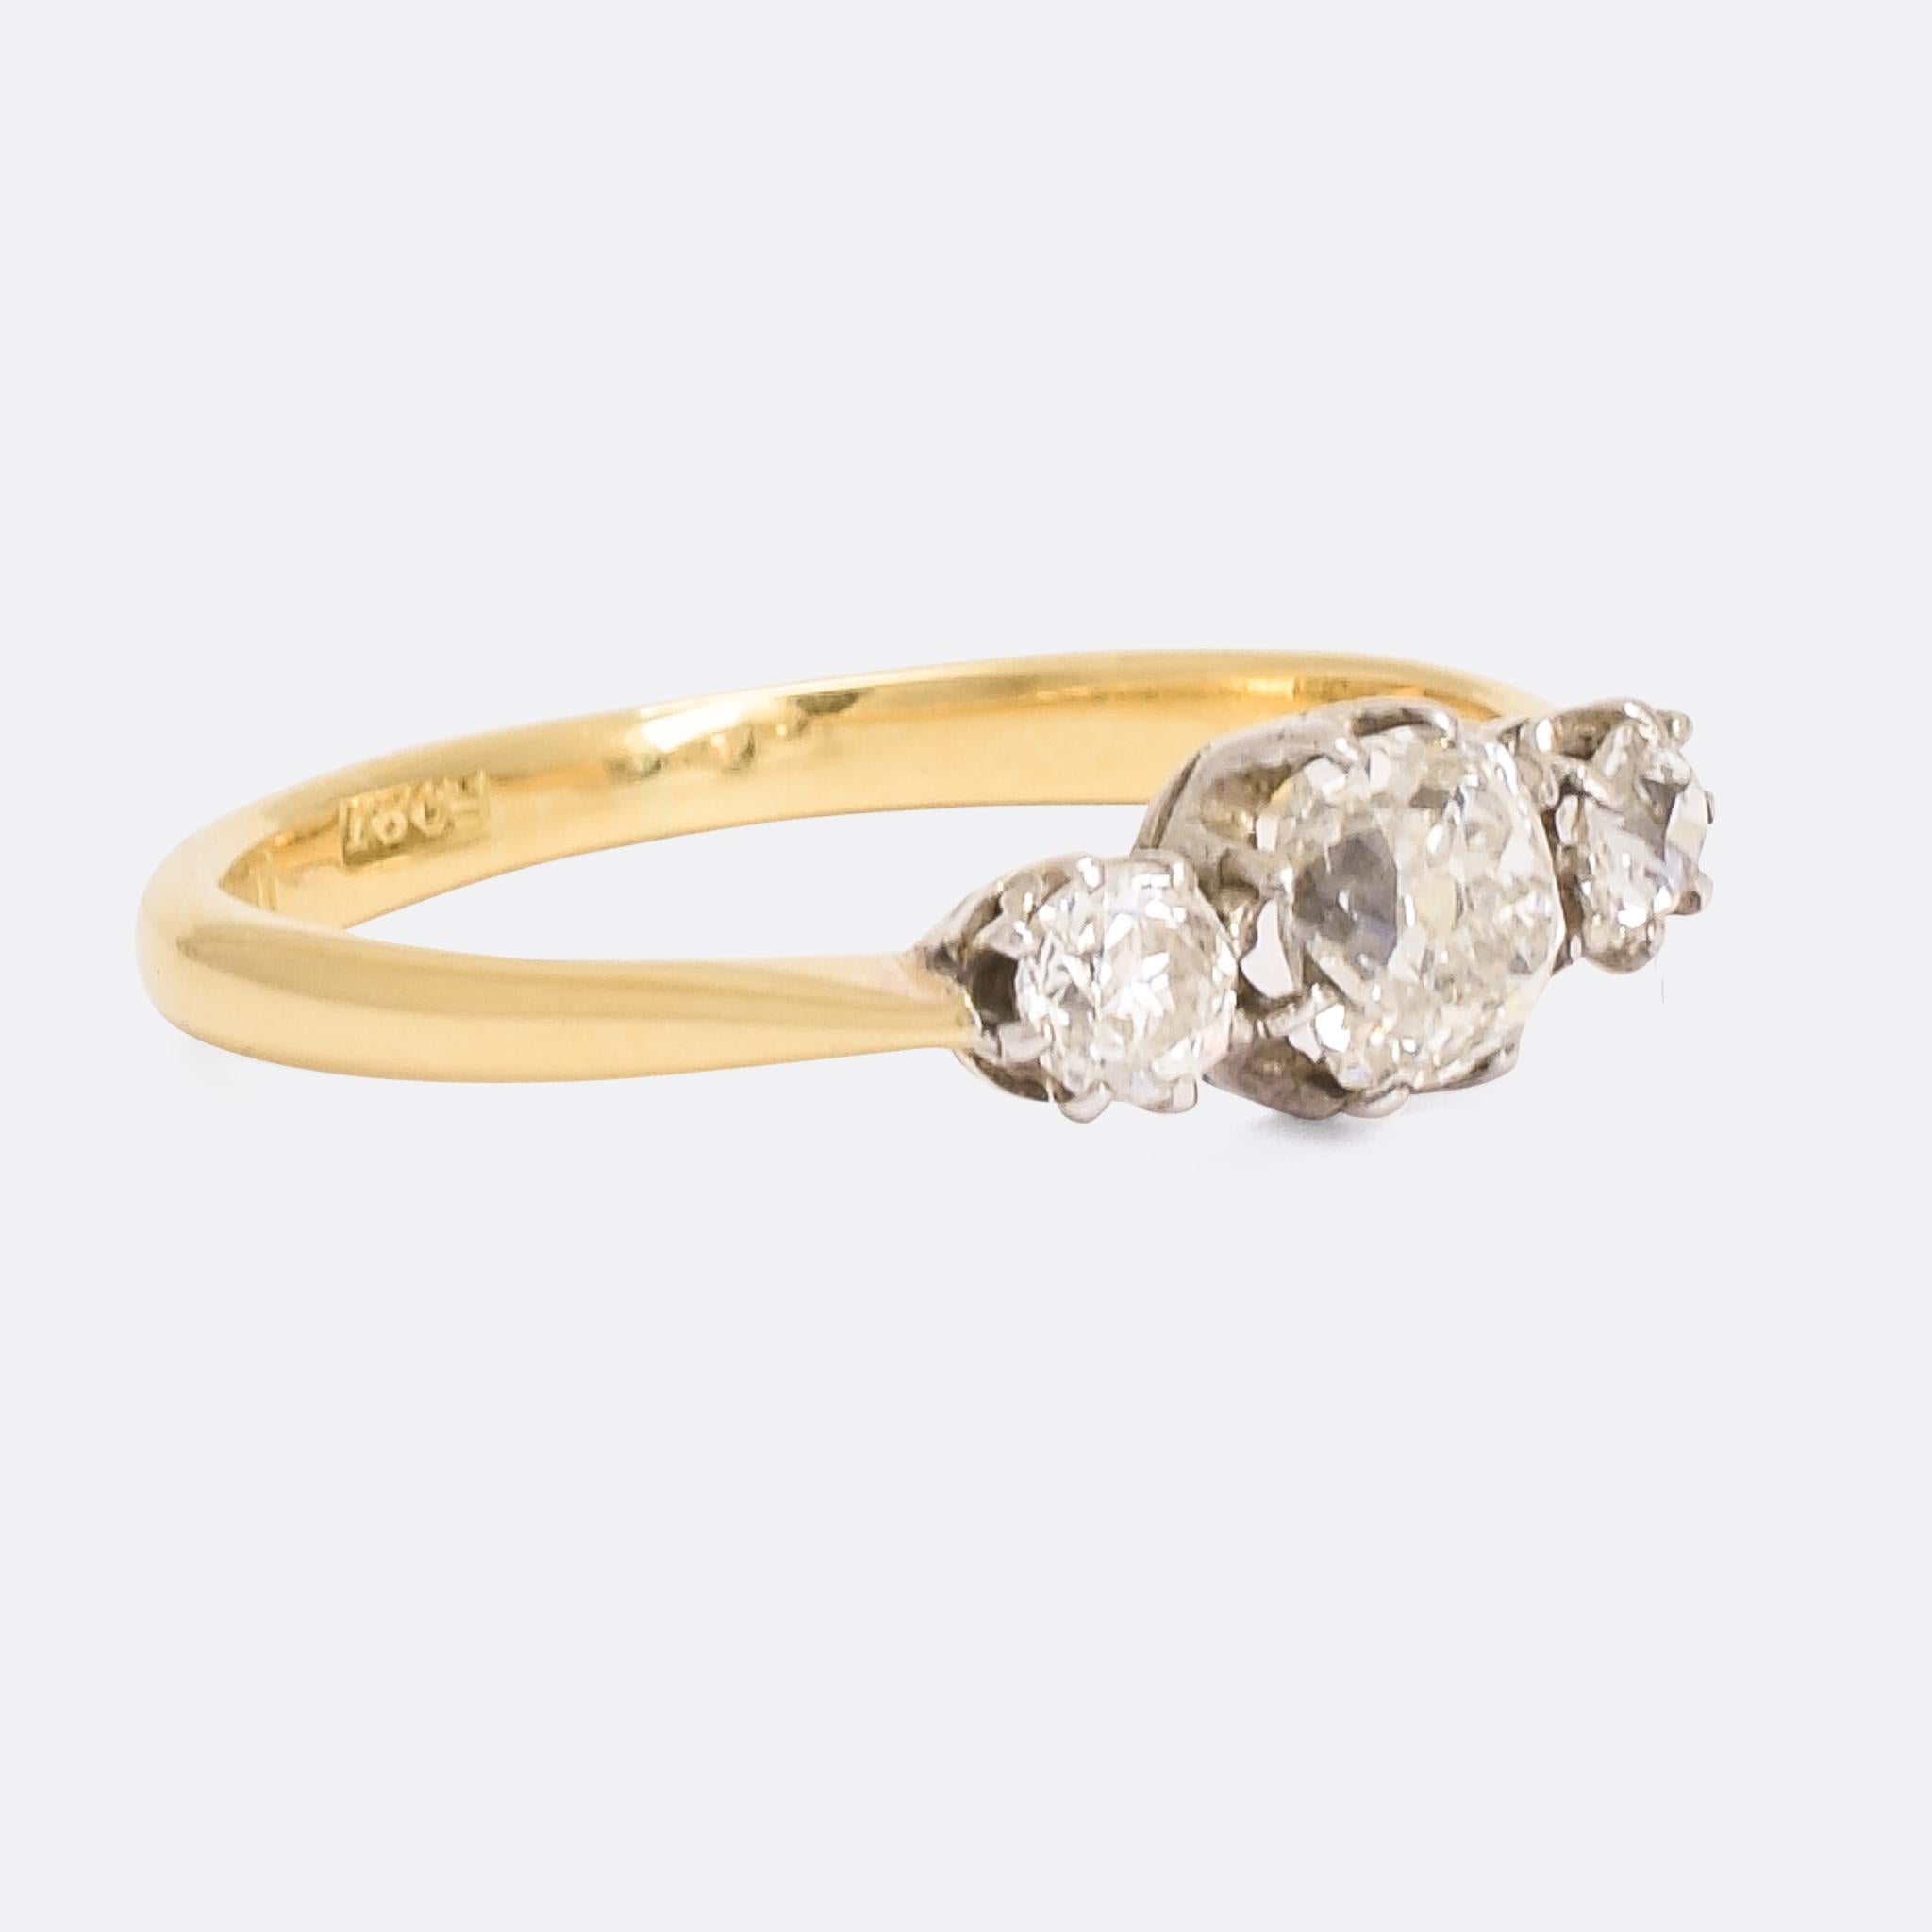 A beautiful antique trilogy ring set with cushion cut diamonds. It dates from the late 19th Century, circa 1900; home to a total of .75cts of diamonds in platinum claw mounts. The band is 18 karat yellow gold, that creates a lovely contrast with the